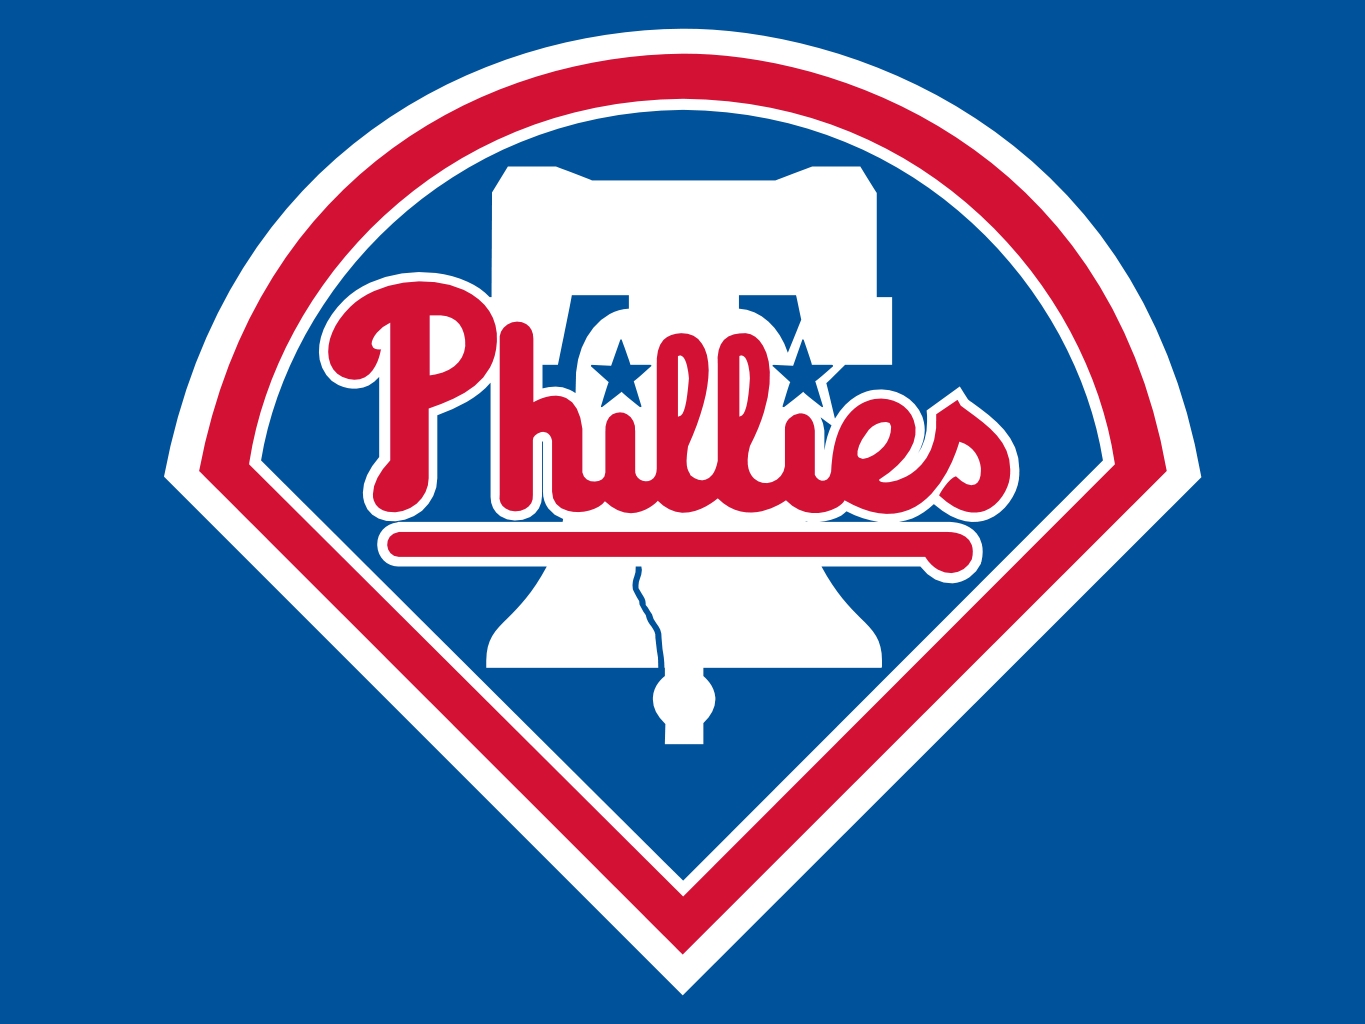 Phillies drawing free image download